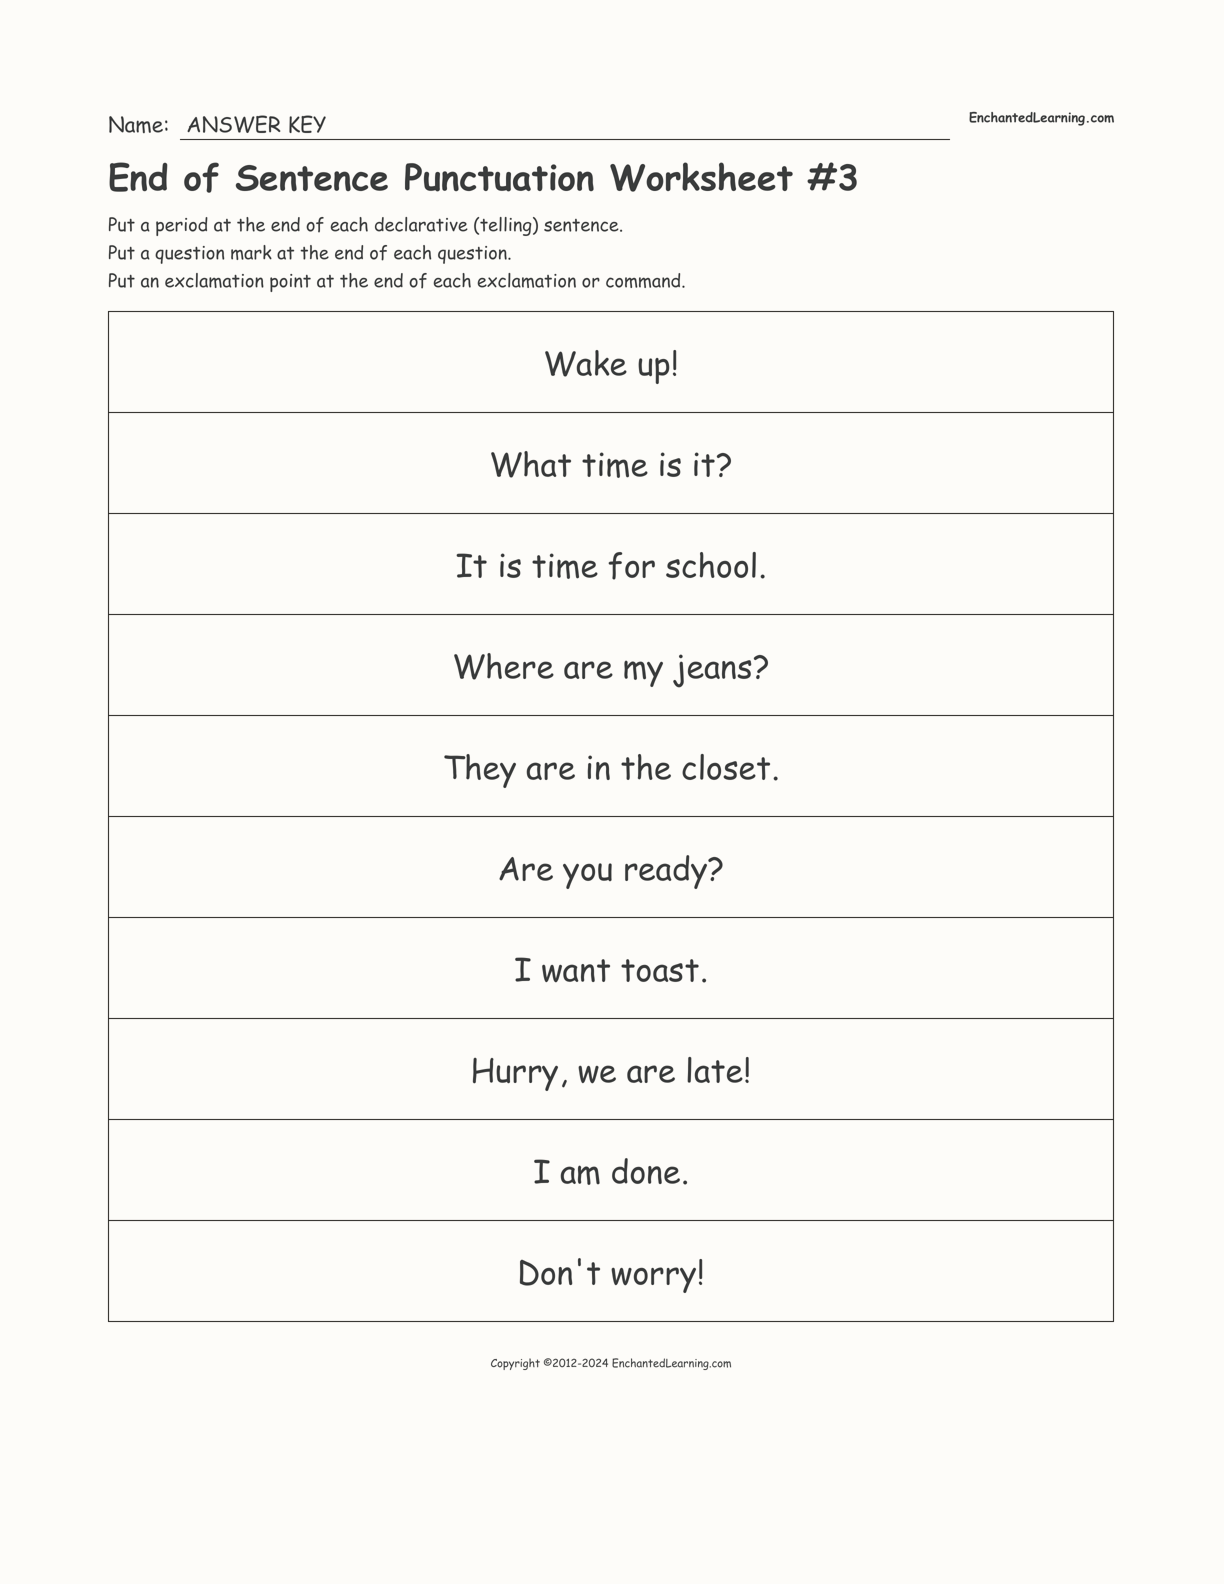 End Of Sentence Punctuation Worksheet 3 Enchanted Learning